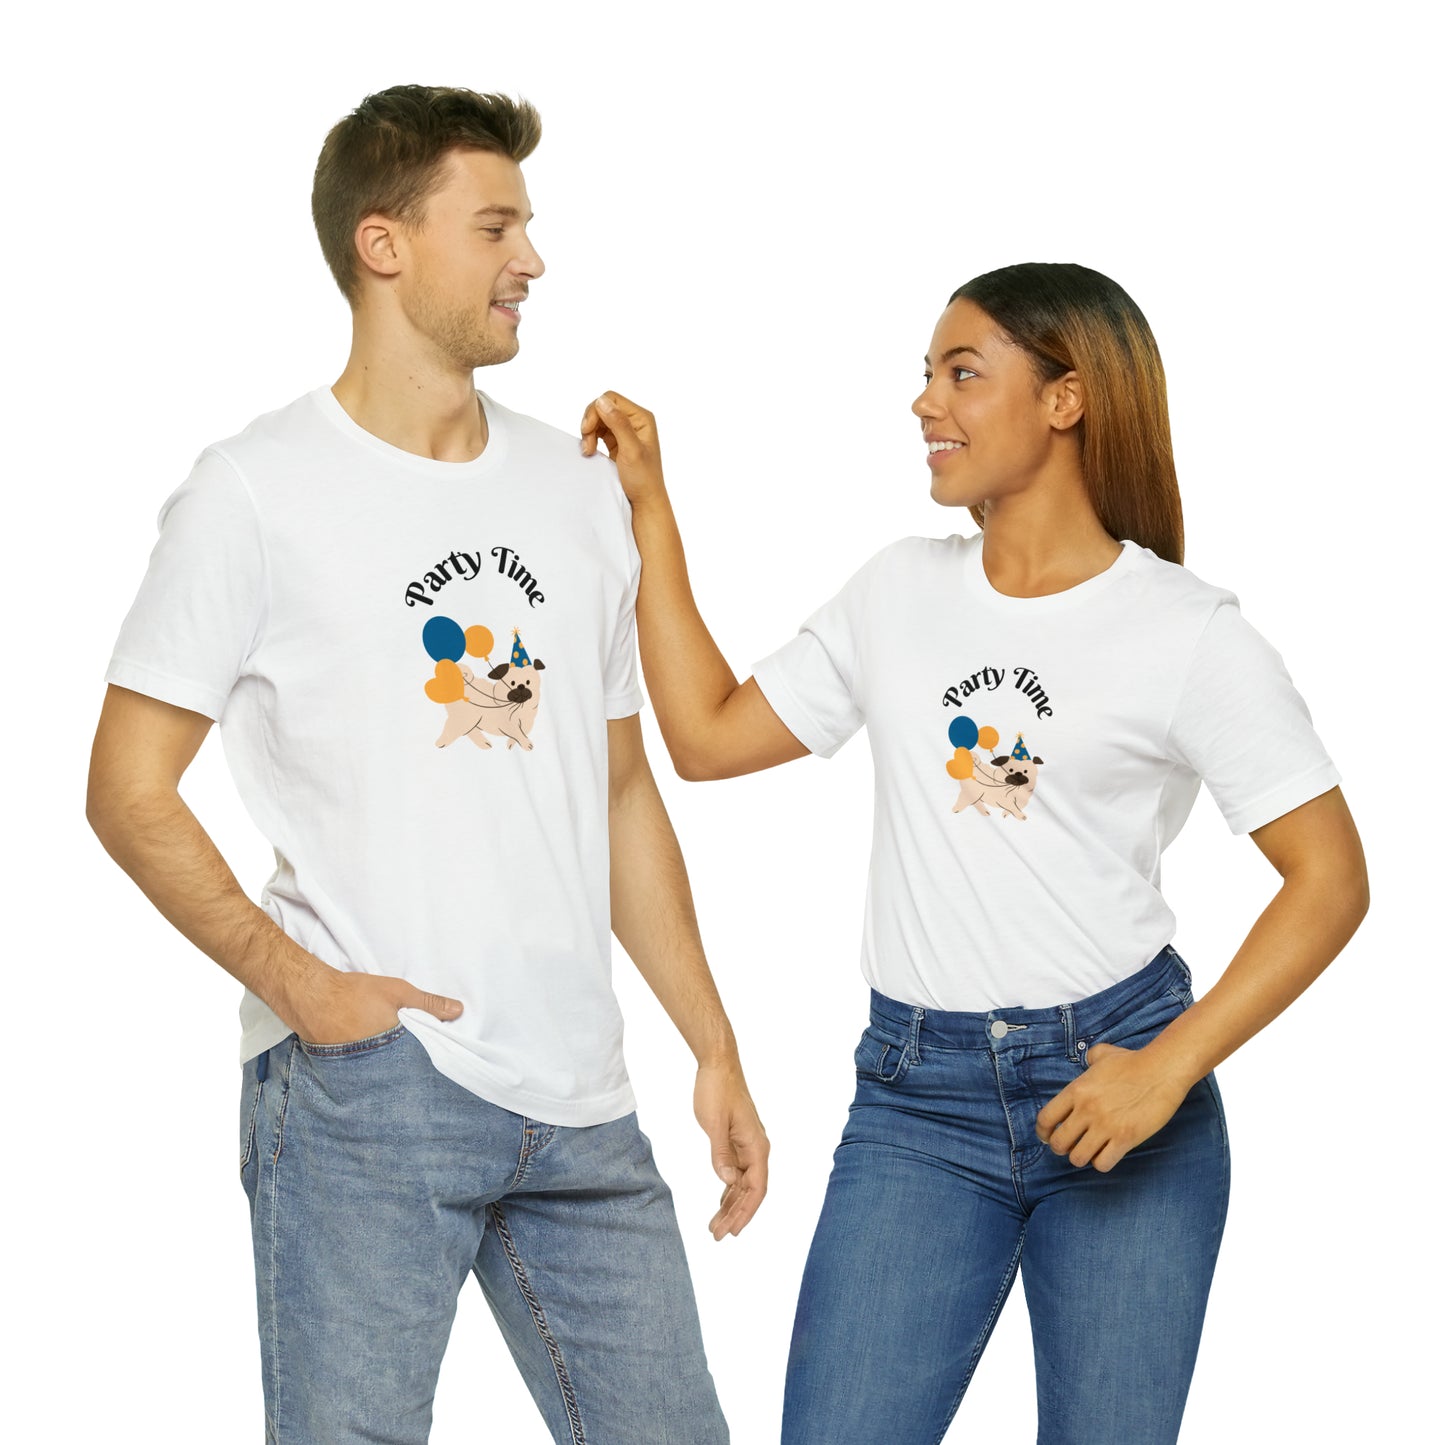 Party Time Unisex Jersey Short Sleeve Tee